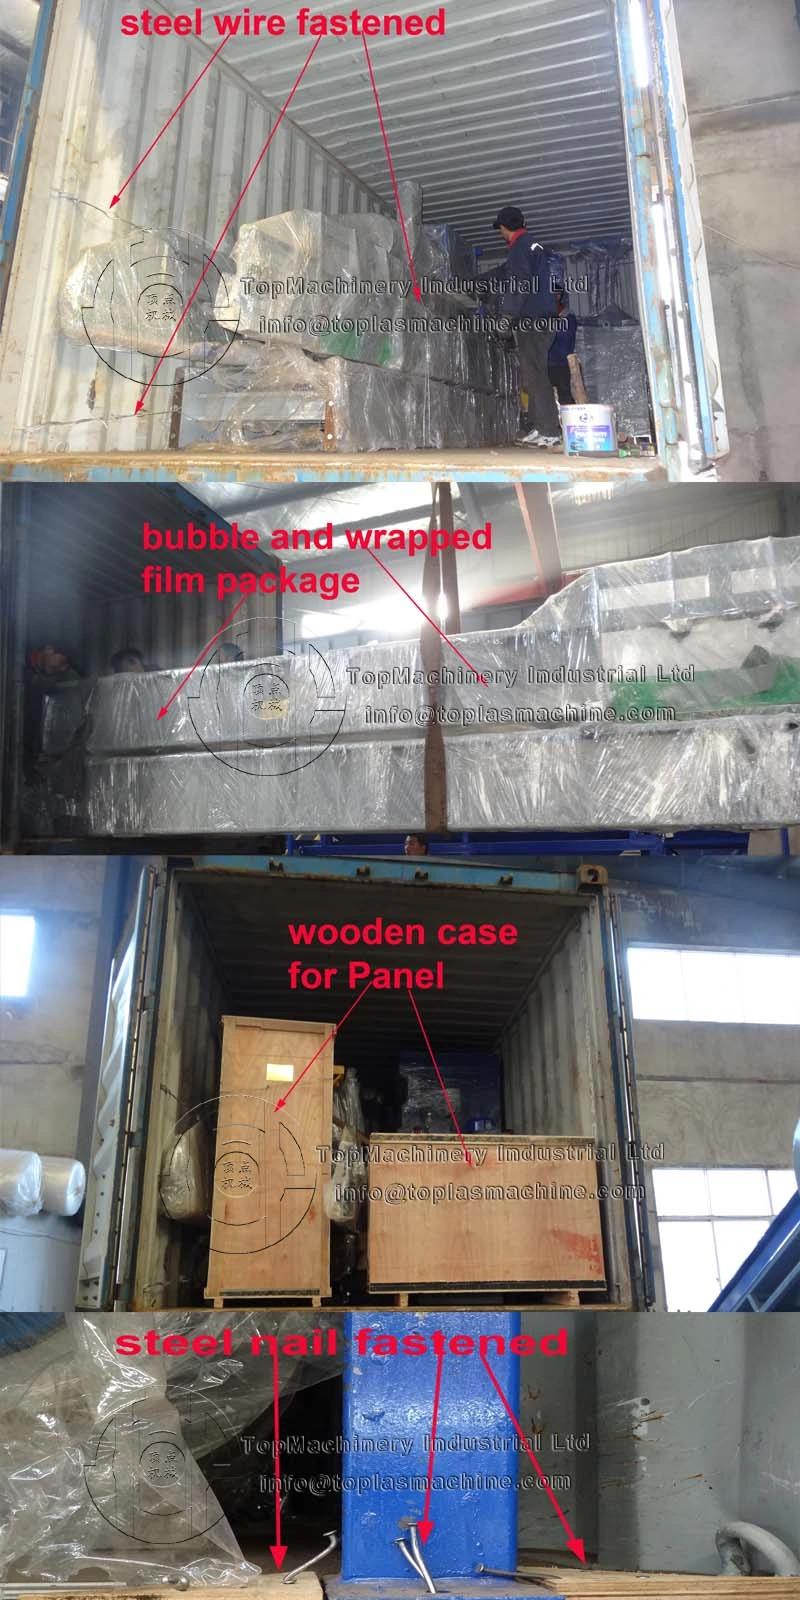 Seafood Box Hot Melting Recycling Machine EPS EPE EPP Densifier